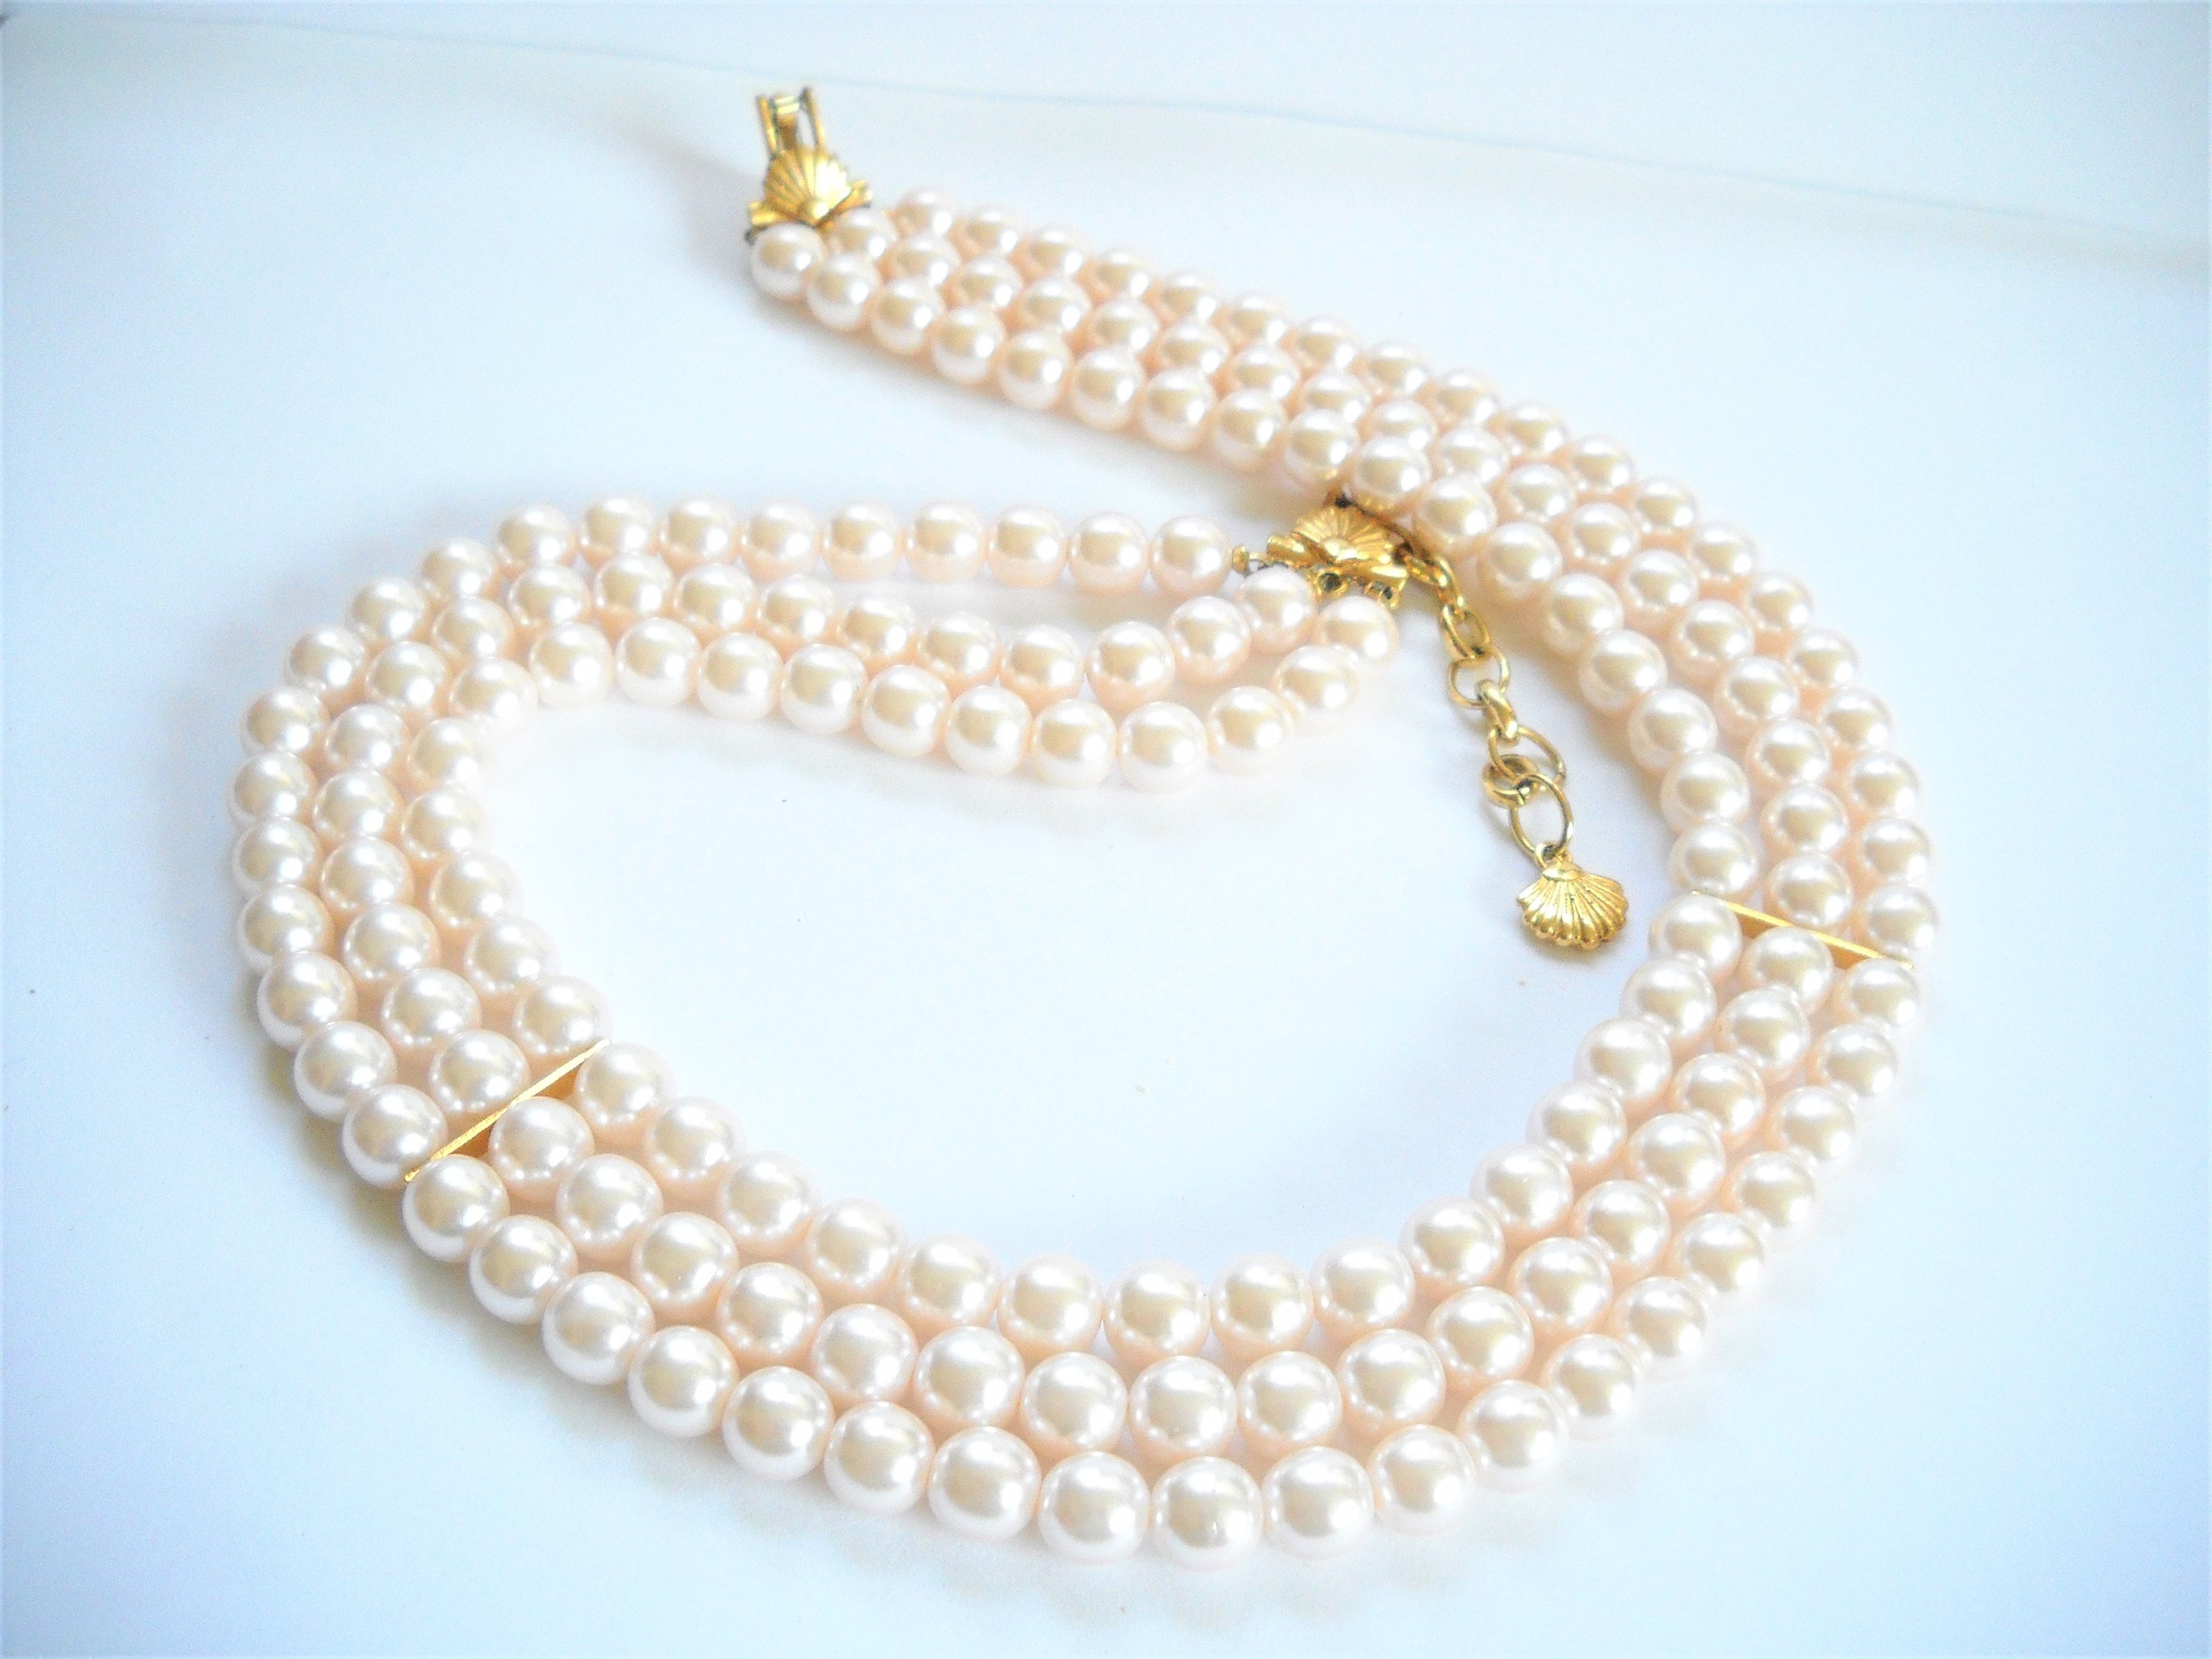 1928 Jewelry Classic 3 Strand Faux Pearl Necklace 16 + 3 Extender